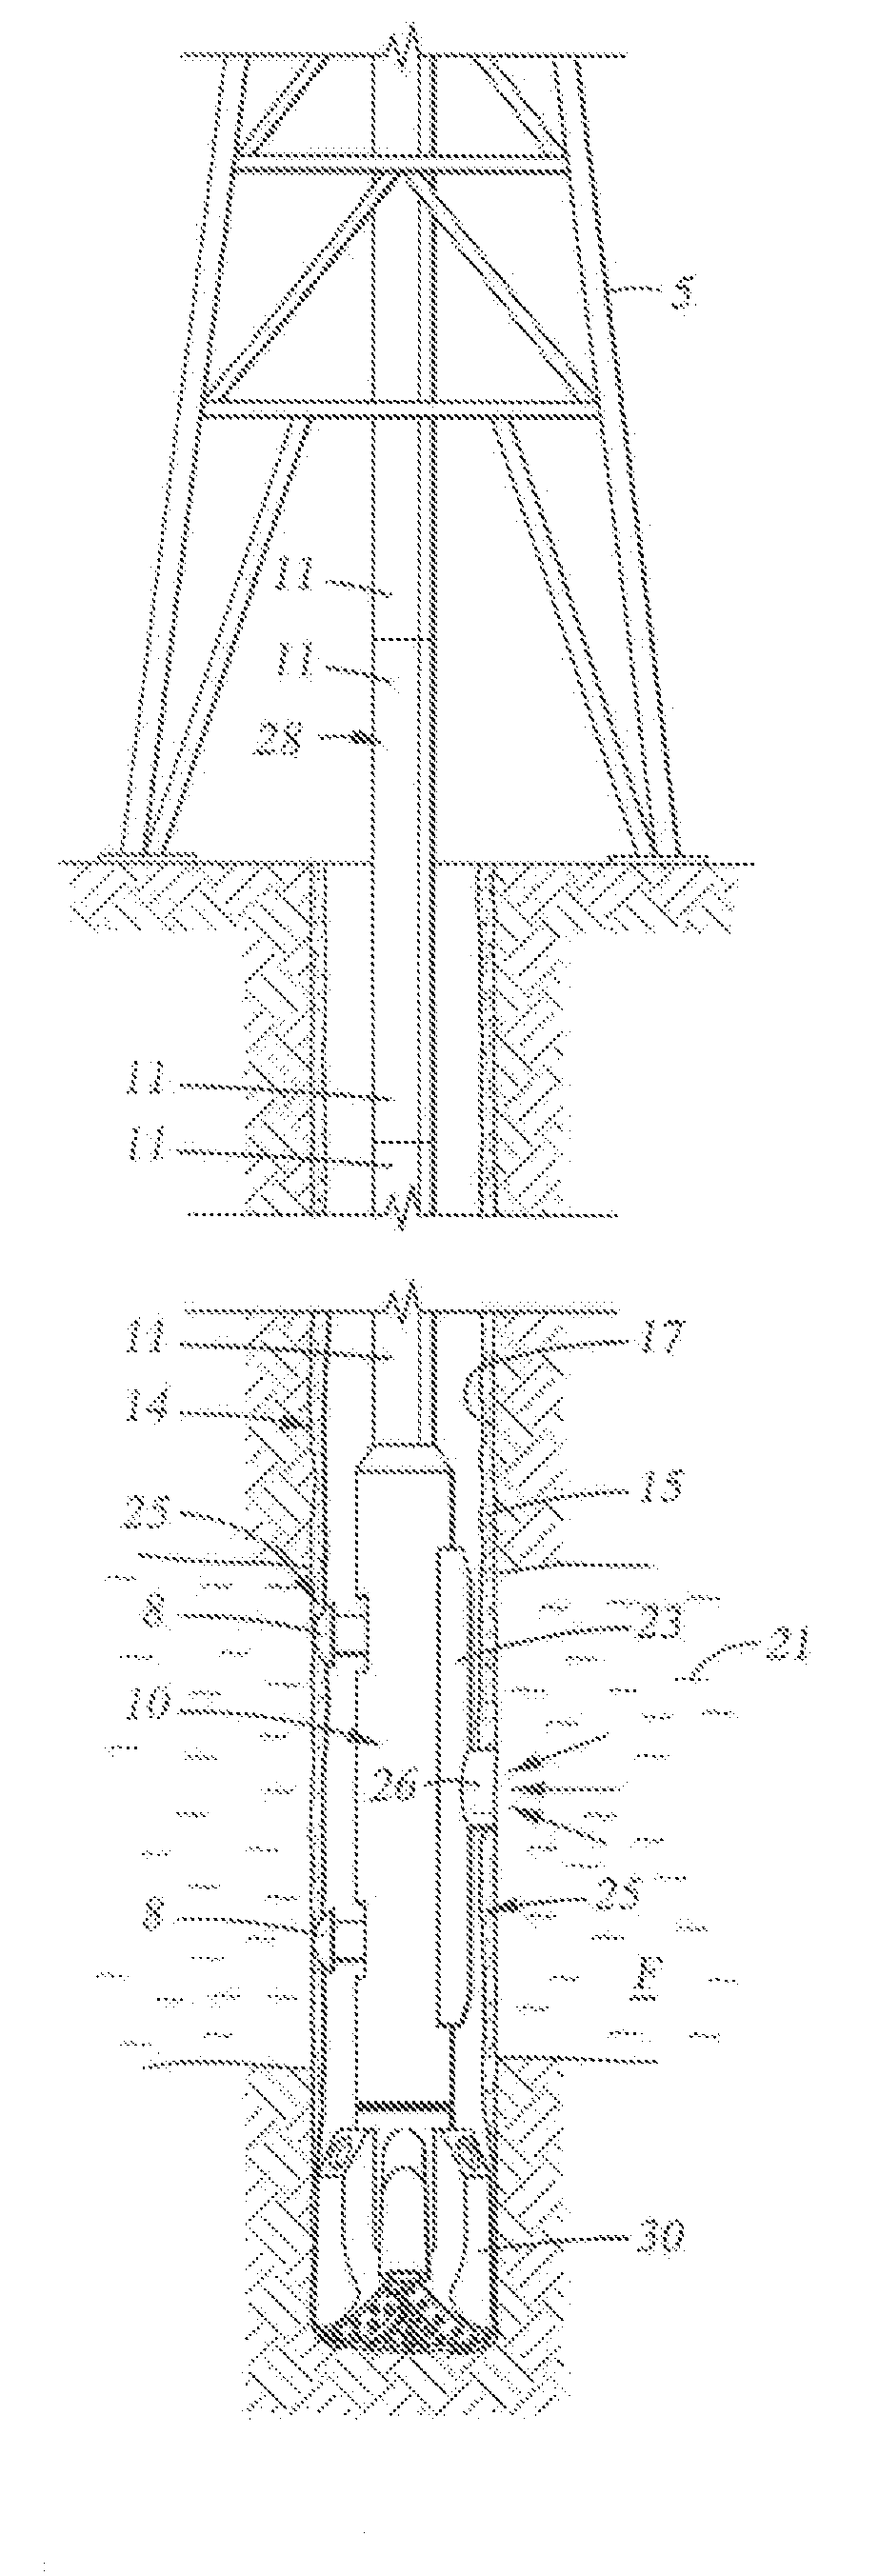 Downhole Tool Having an Extendable Component with a Pivoting Element